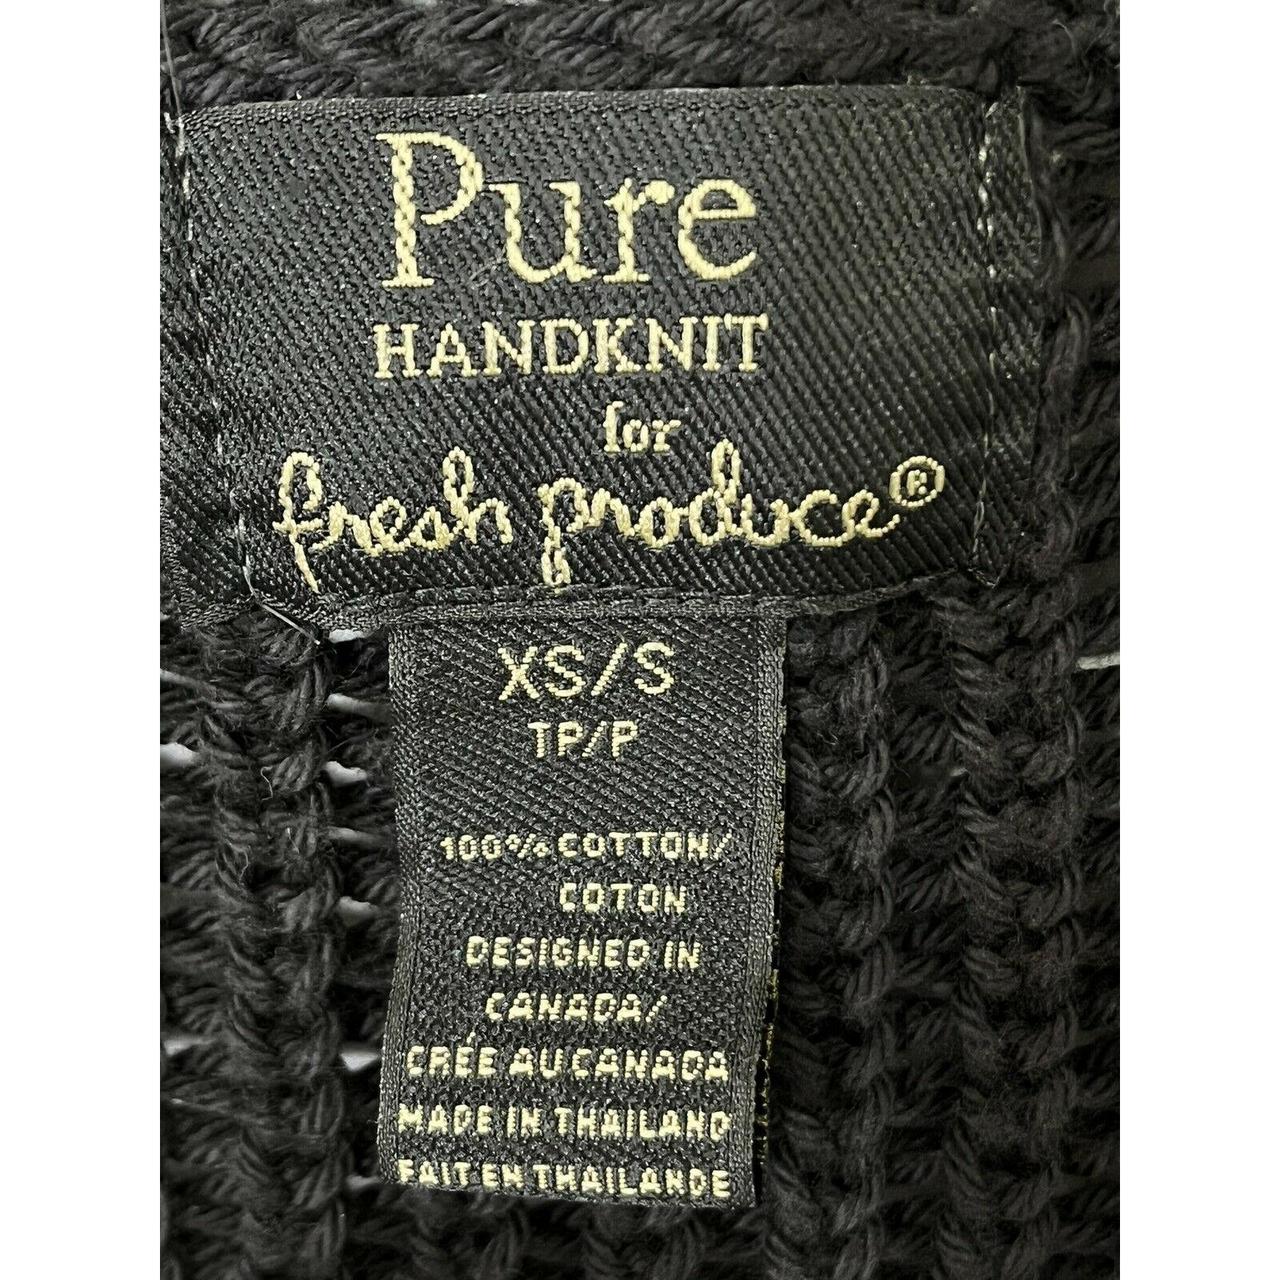 Product Image 4 - Womens Pure Handknit for Freah